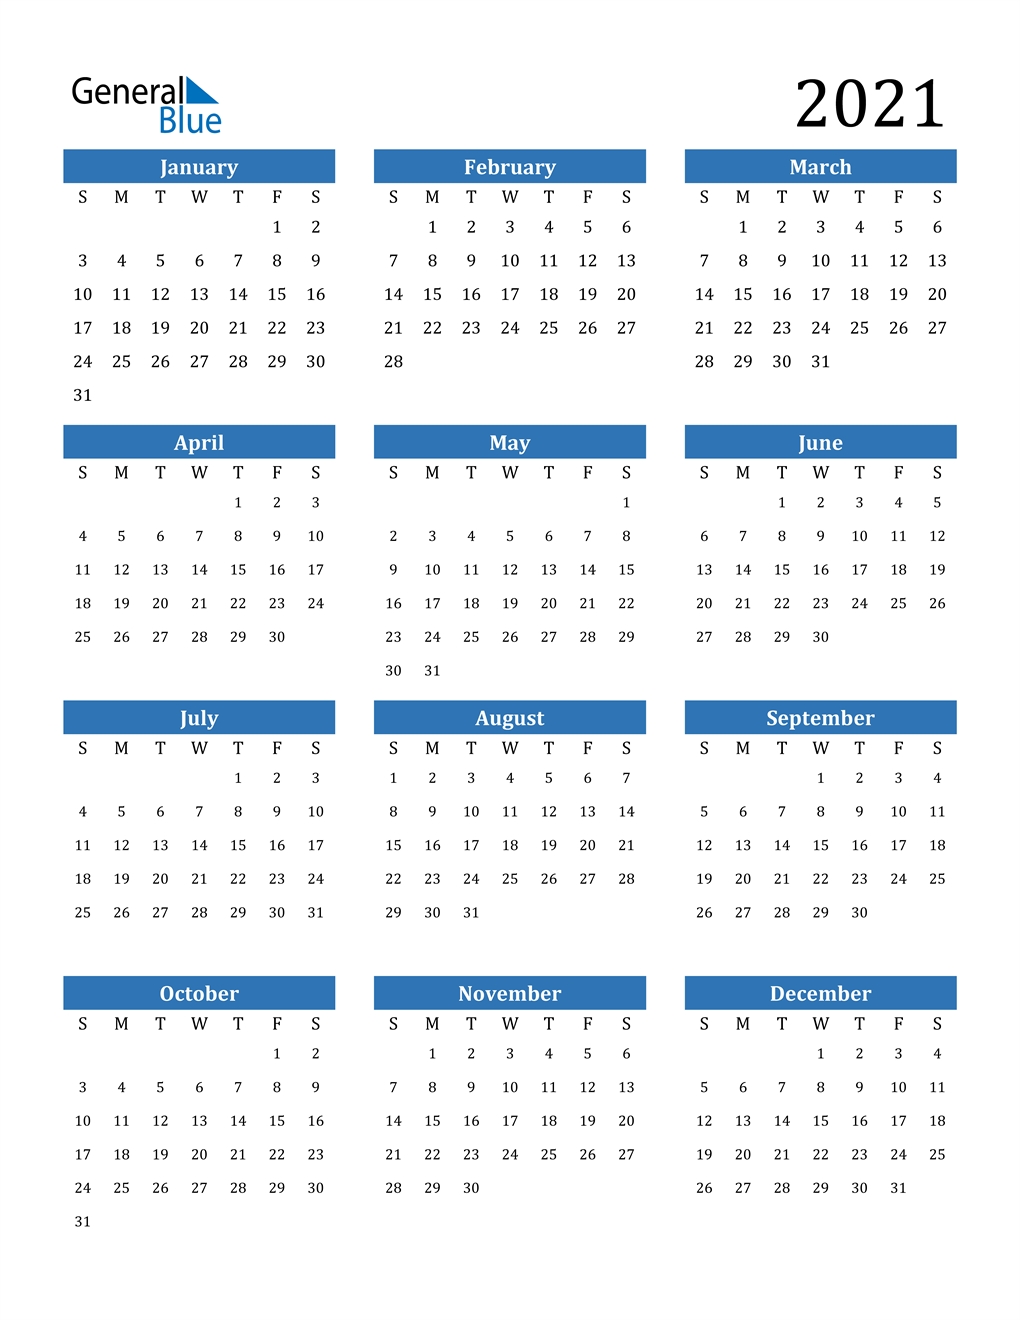 Catch 2021 Calendars To Print Without